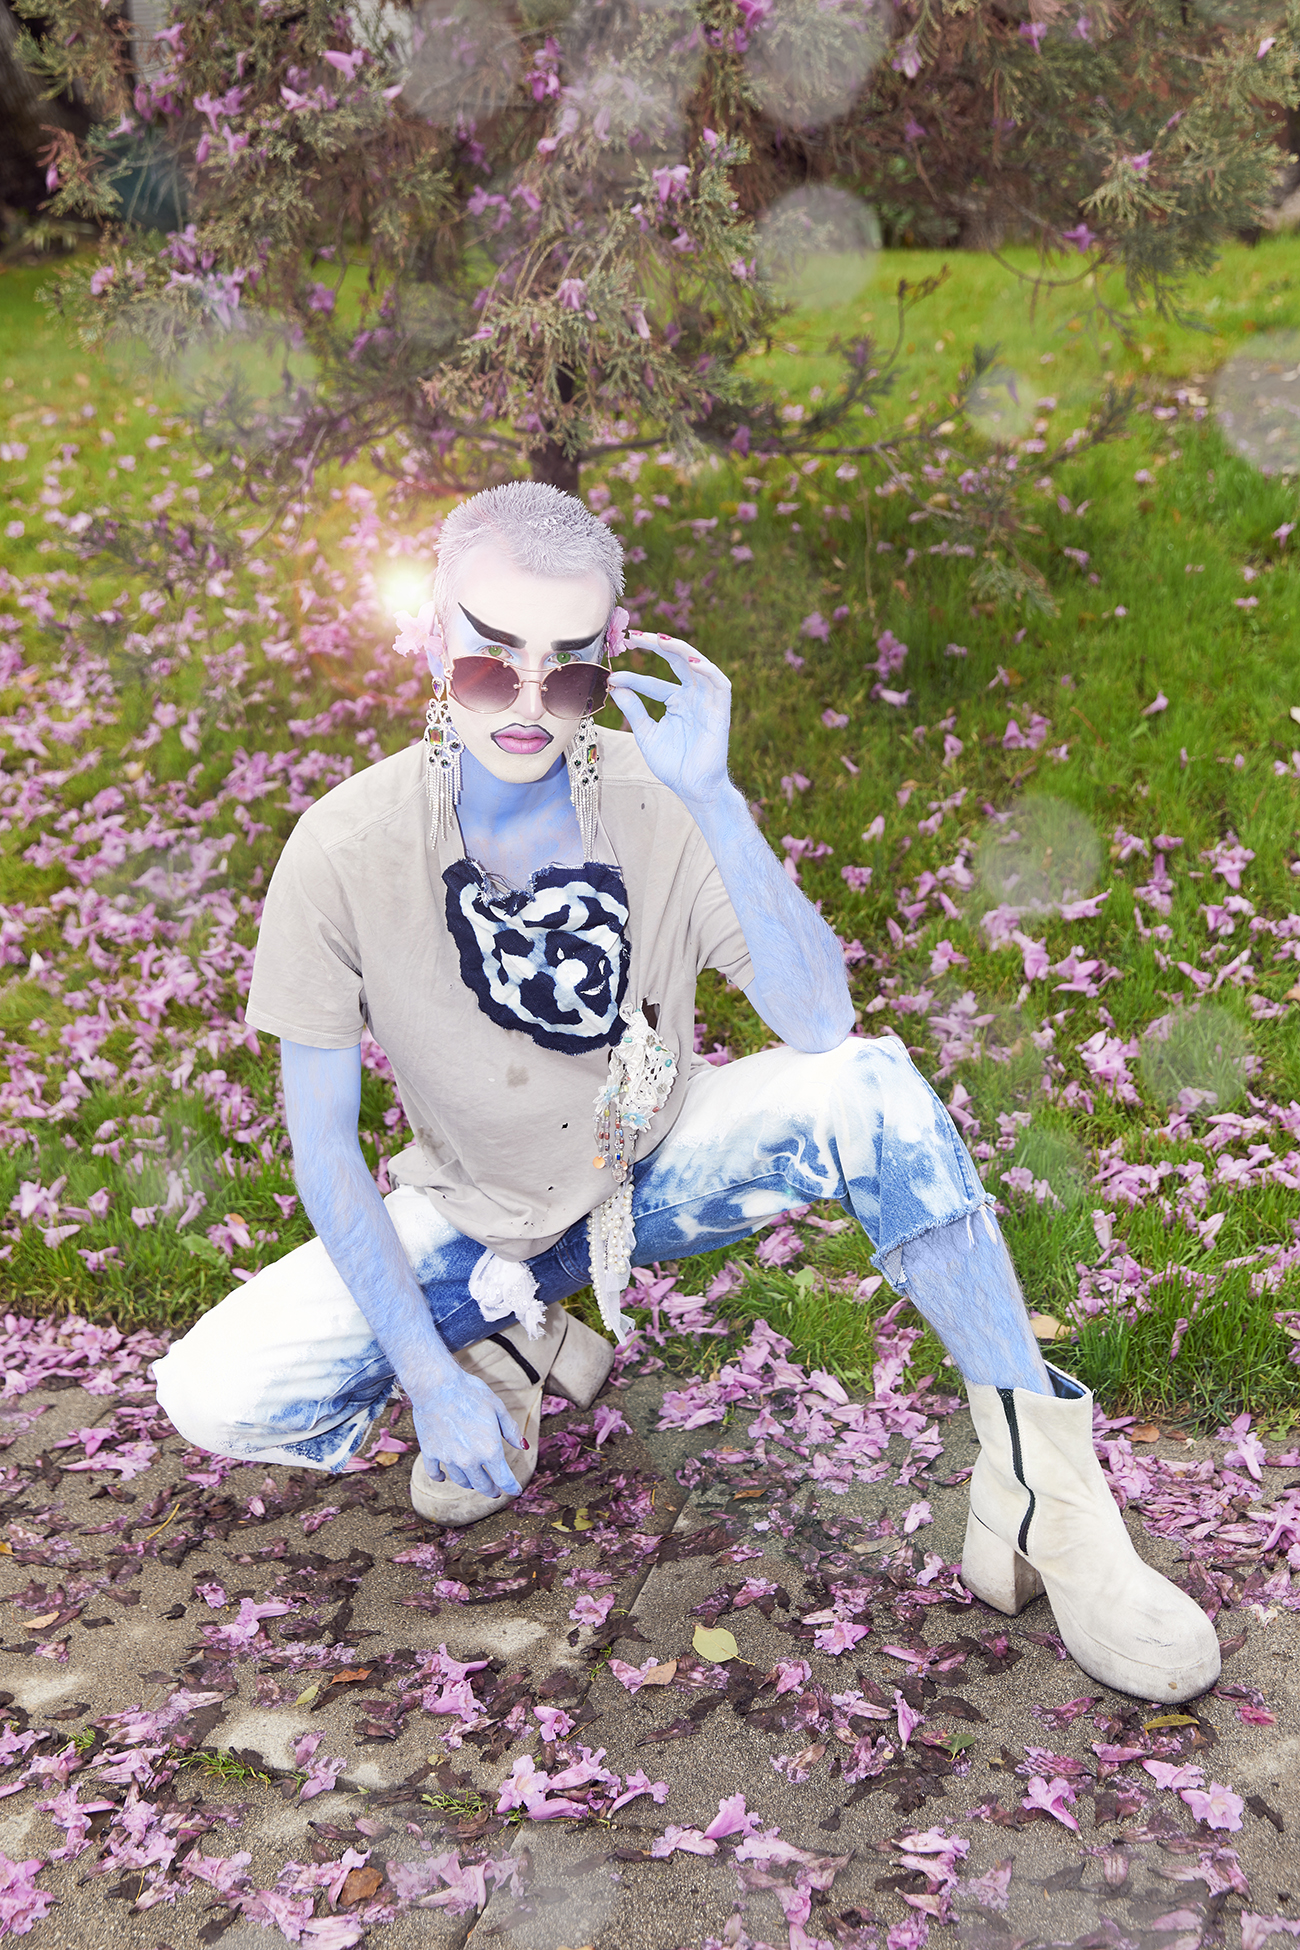 Jesse in blue makeup crouched on a sidewalk covered in pink flowers